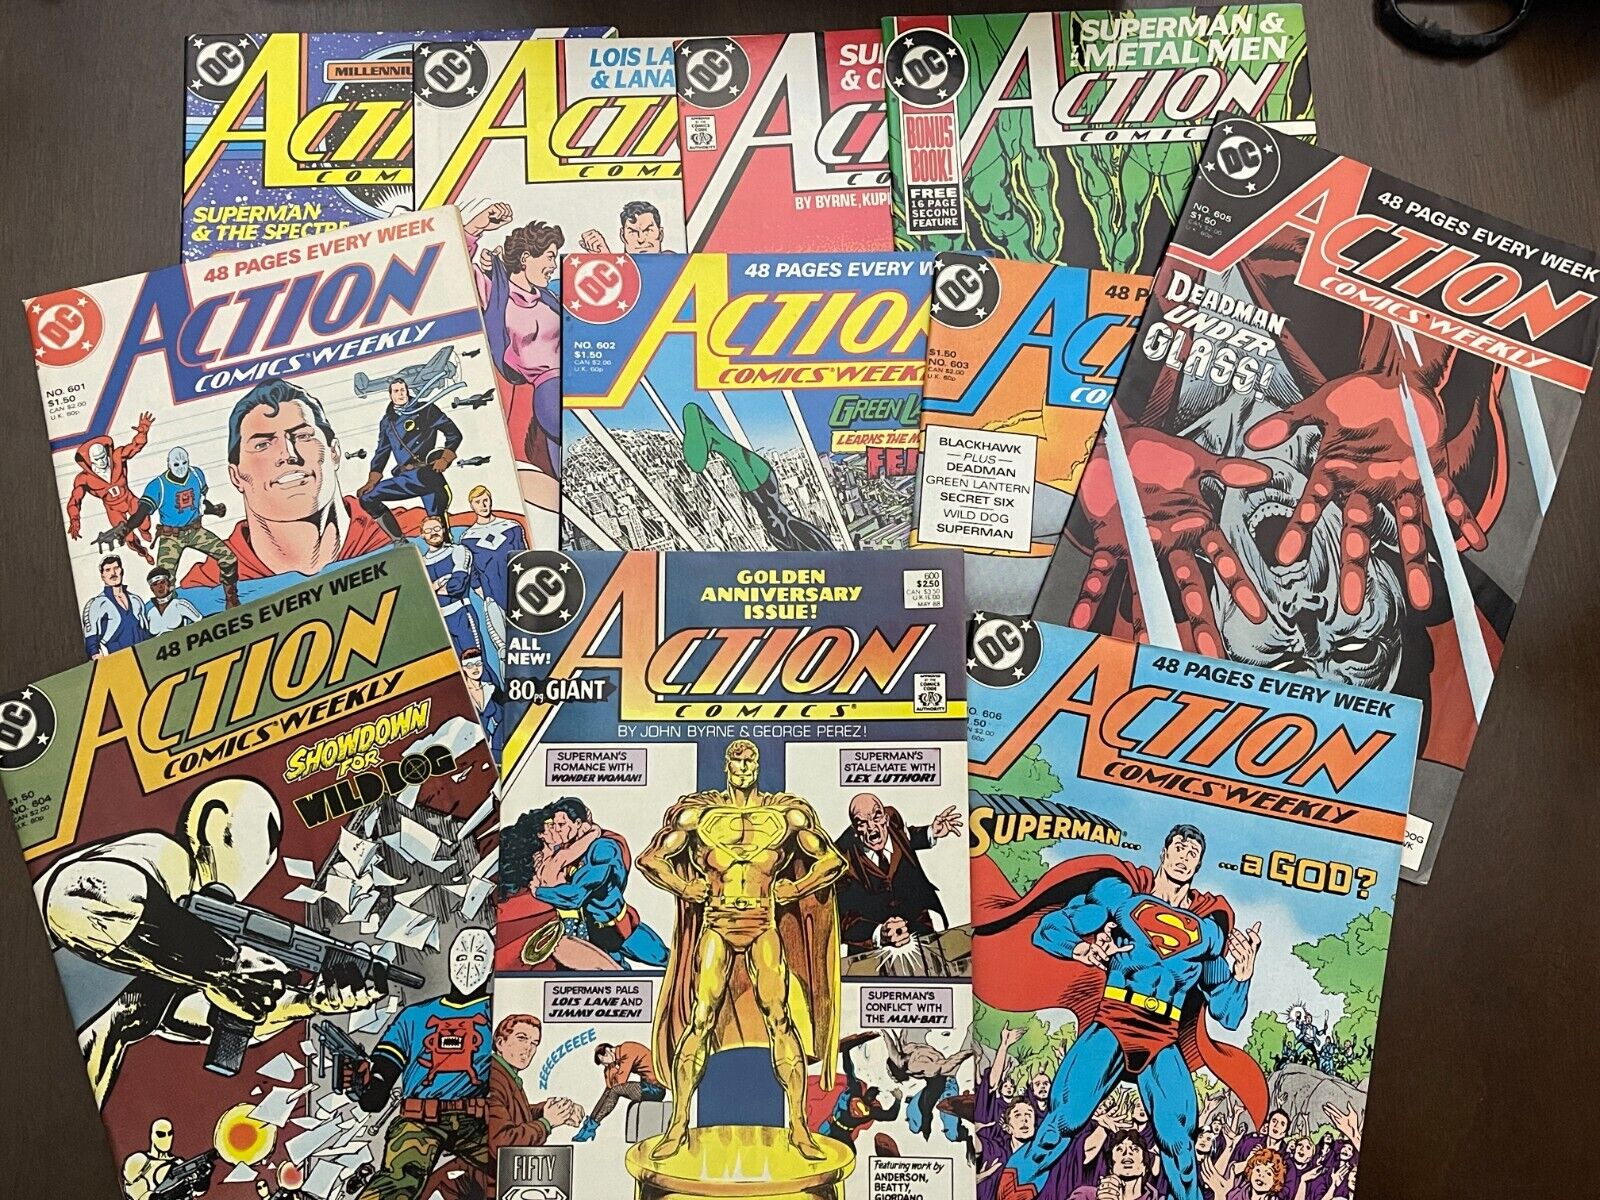 DC Action Comics #596-606 -Lot of 11 RUN - See Pics for Condition - Superman 600